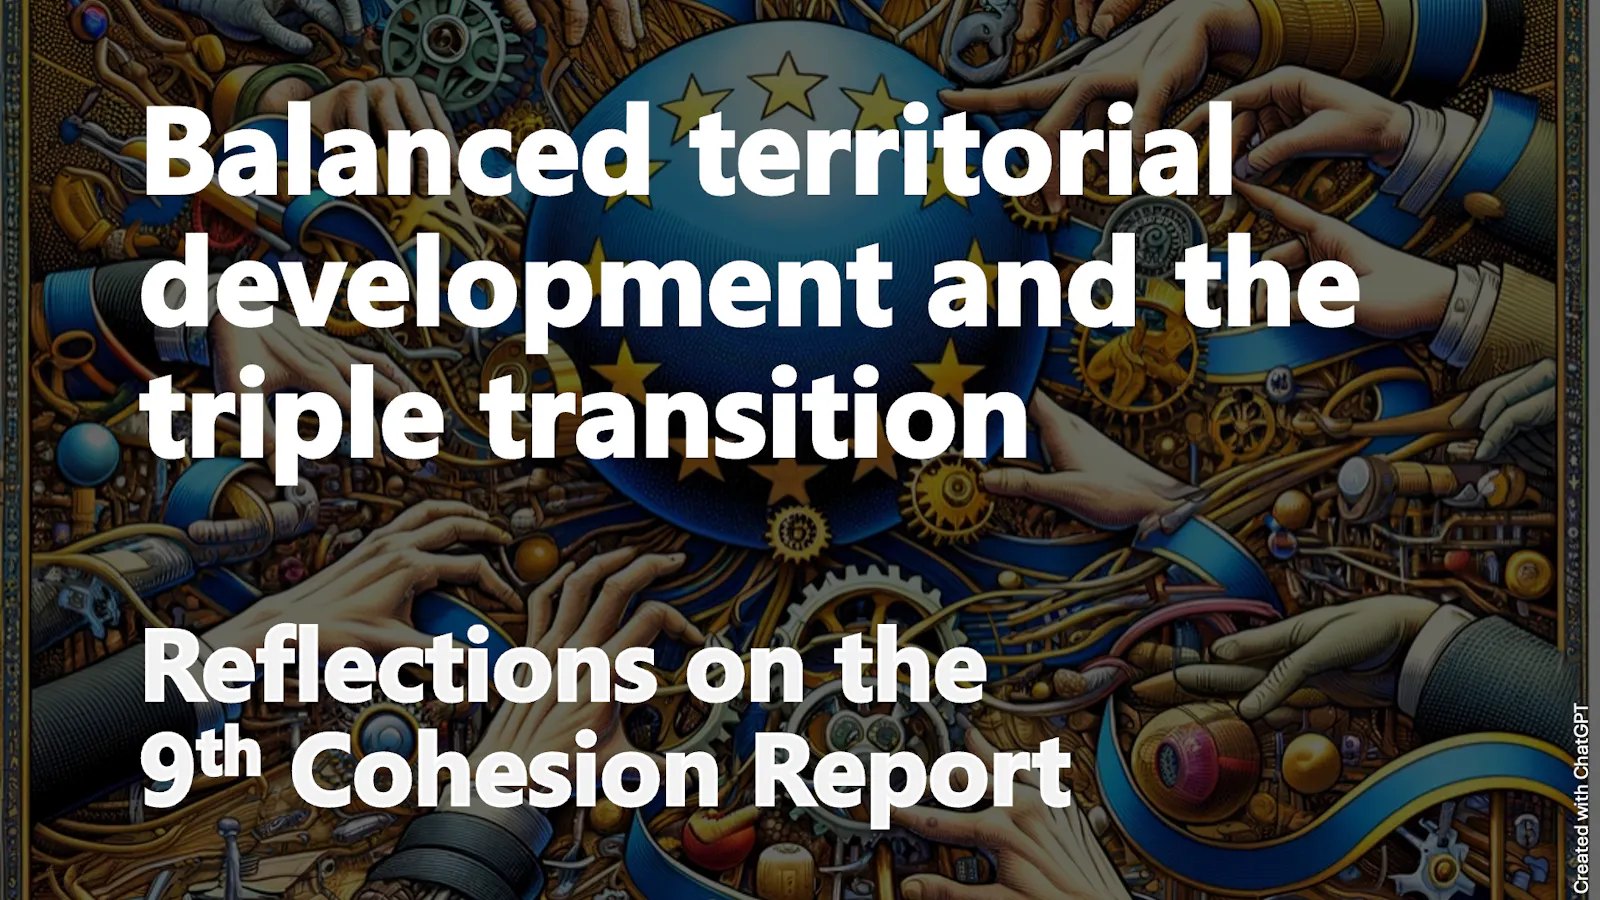 Balanced territorial development and the triple transition.